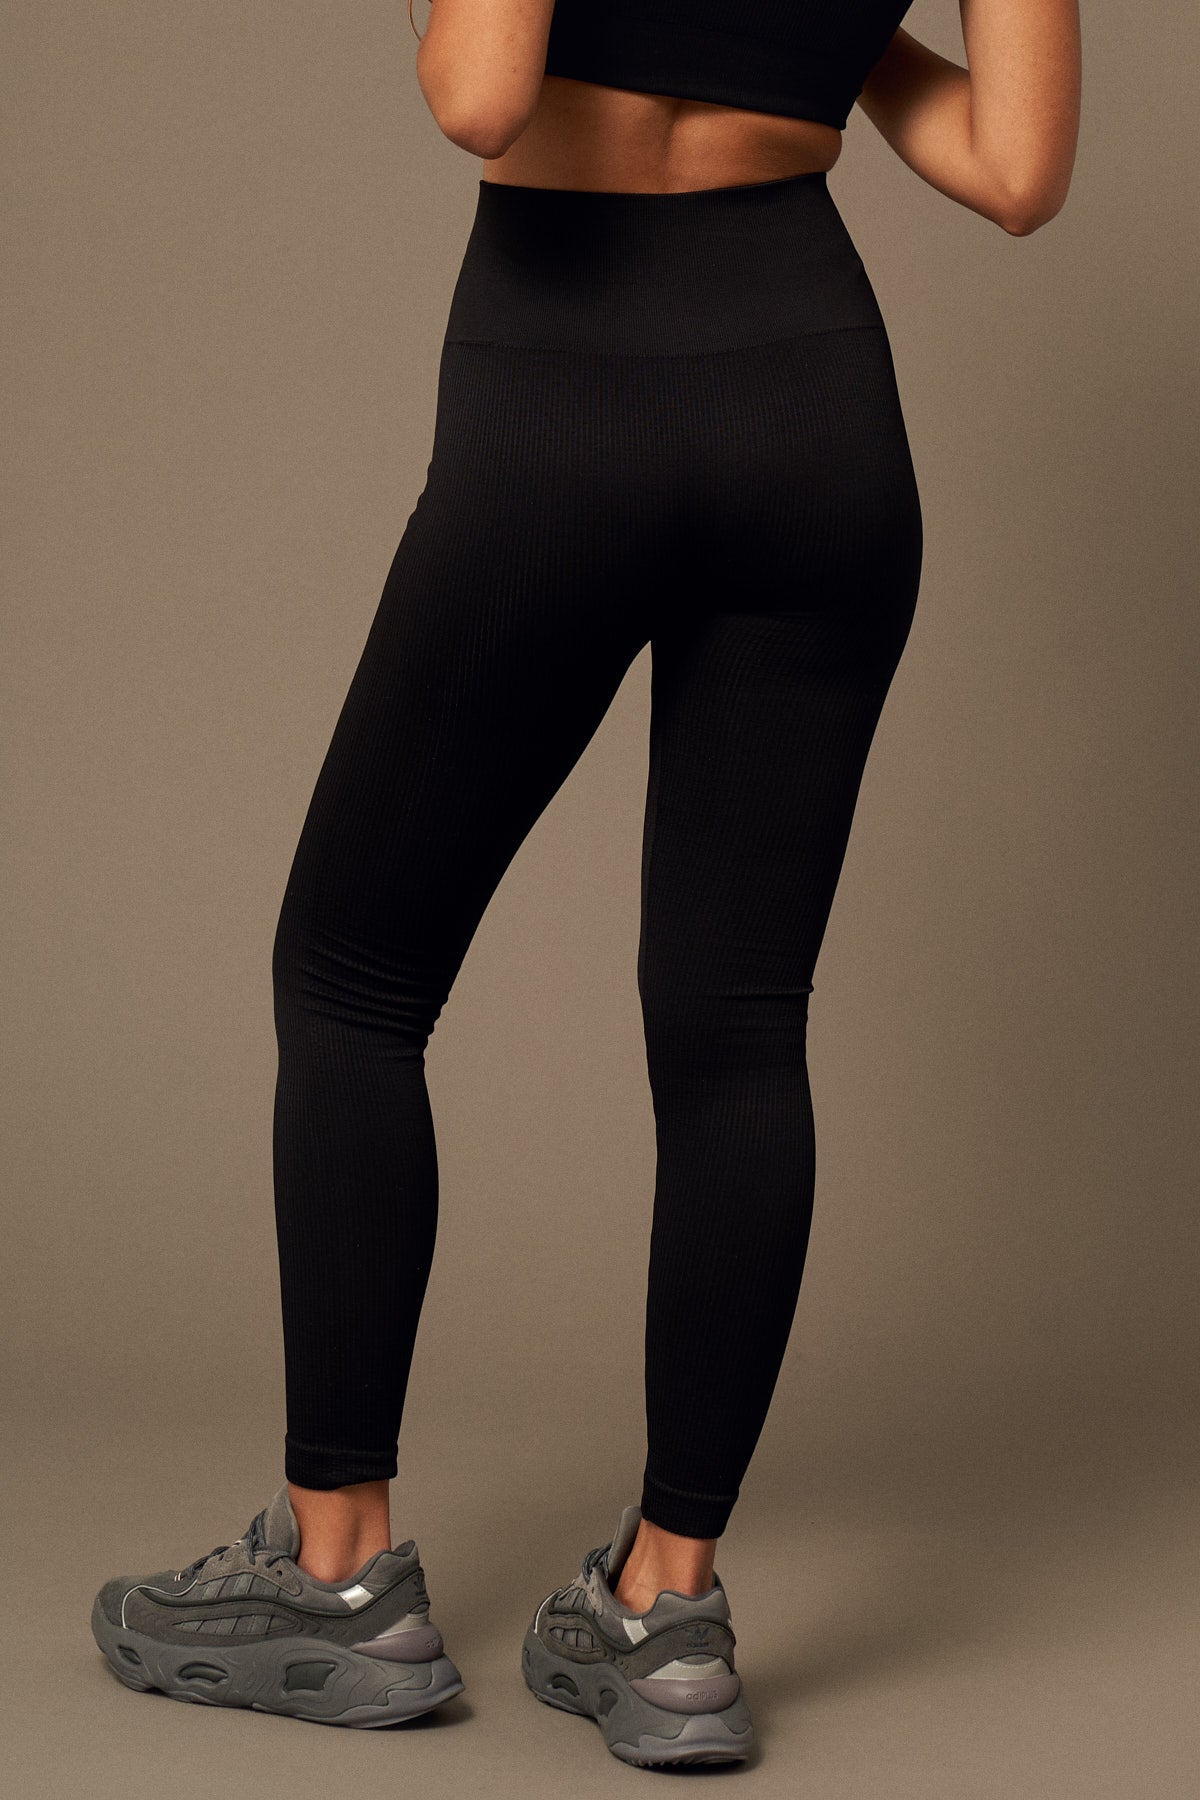 Beyond Leg in Black-Long Leggings-Shop Sustainable Recycled Yoga Leggings Women's Clothing On-line Barcelona Believe Athletics Sustainable Recycled Yoga Clothes